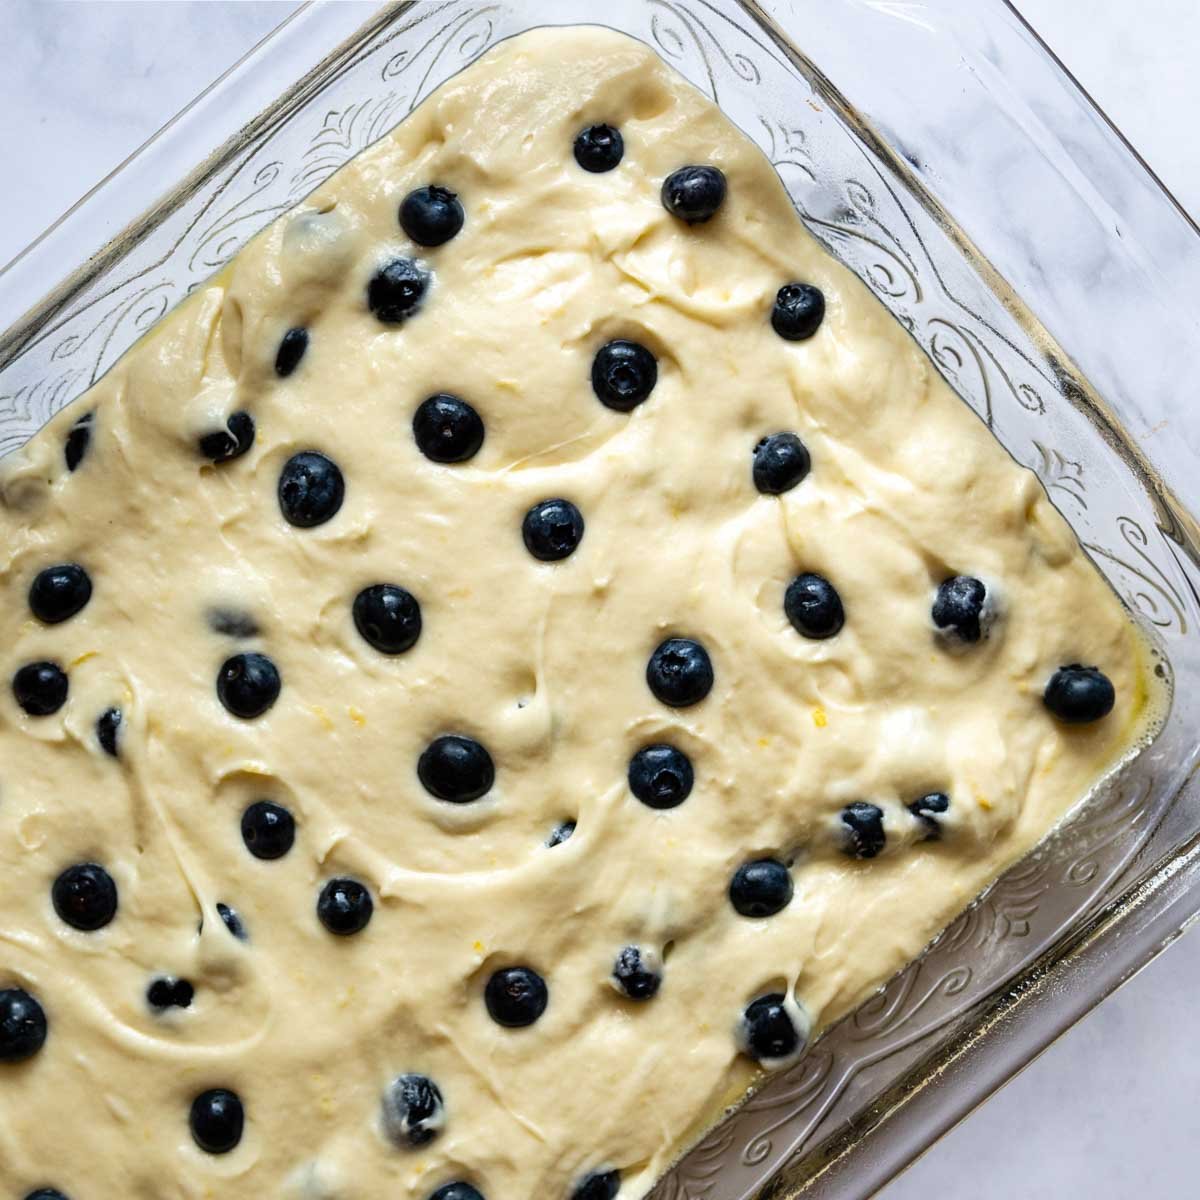 blueberries on top of unbaked cake.